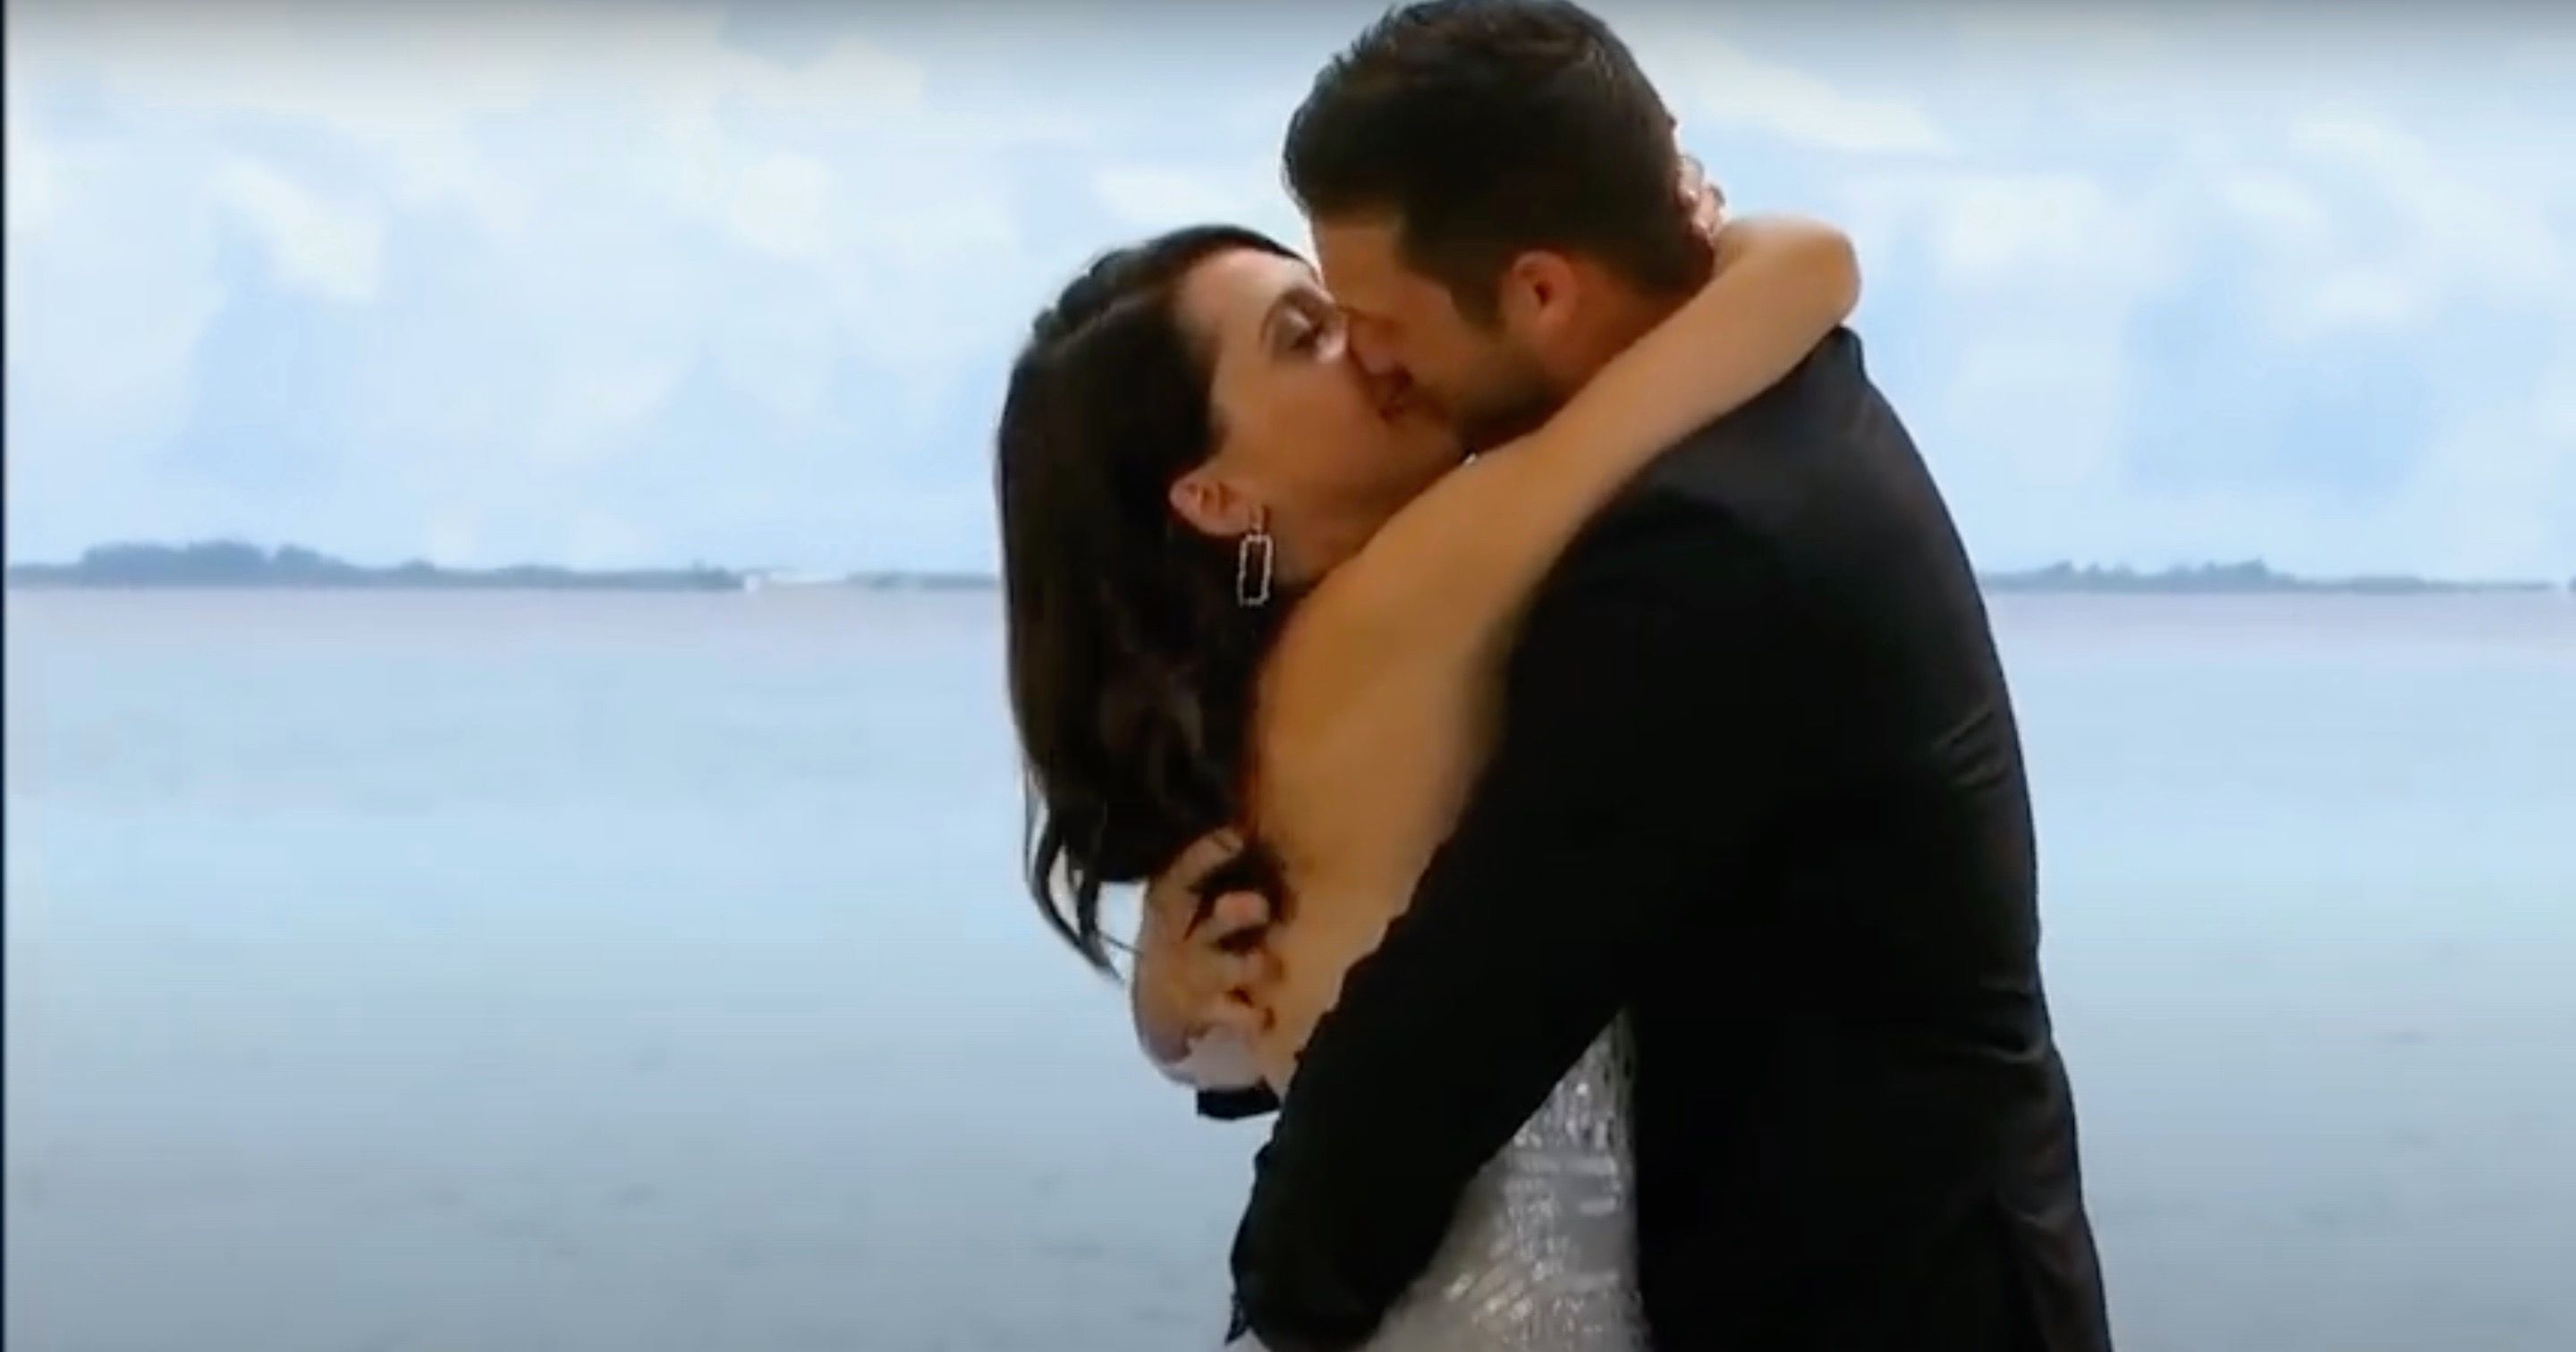 Becca kissing Garrett after he proposes to her in The Bachelor.